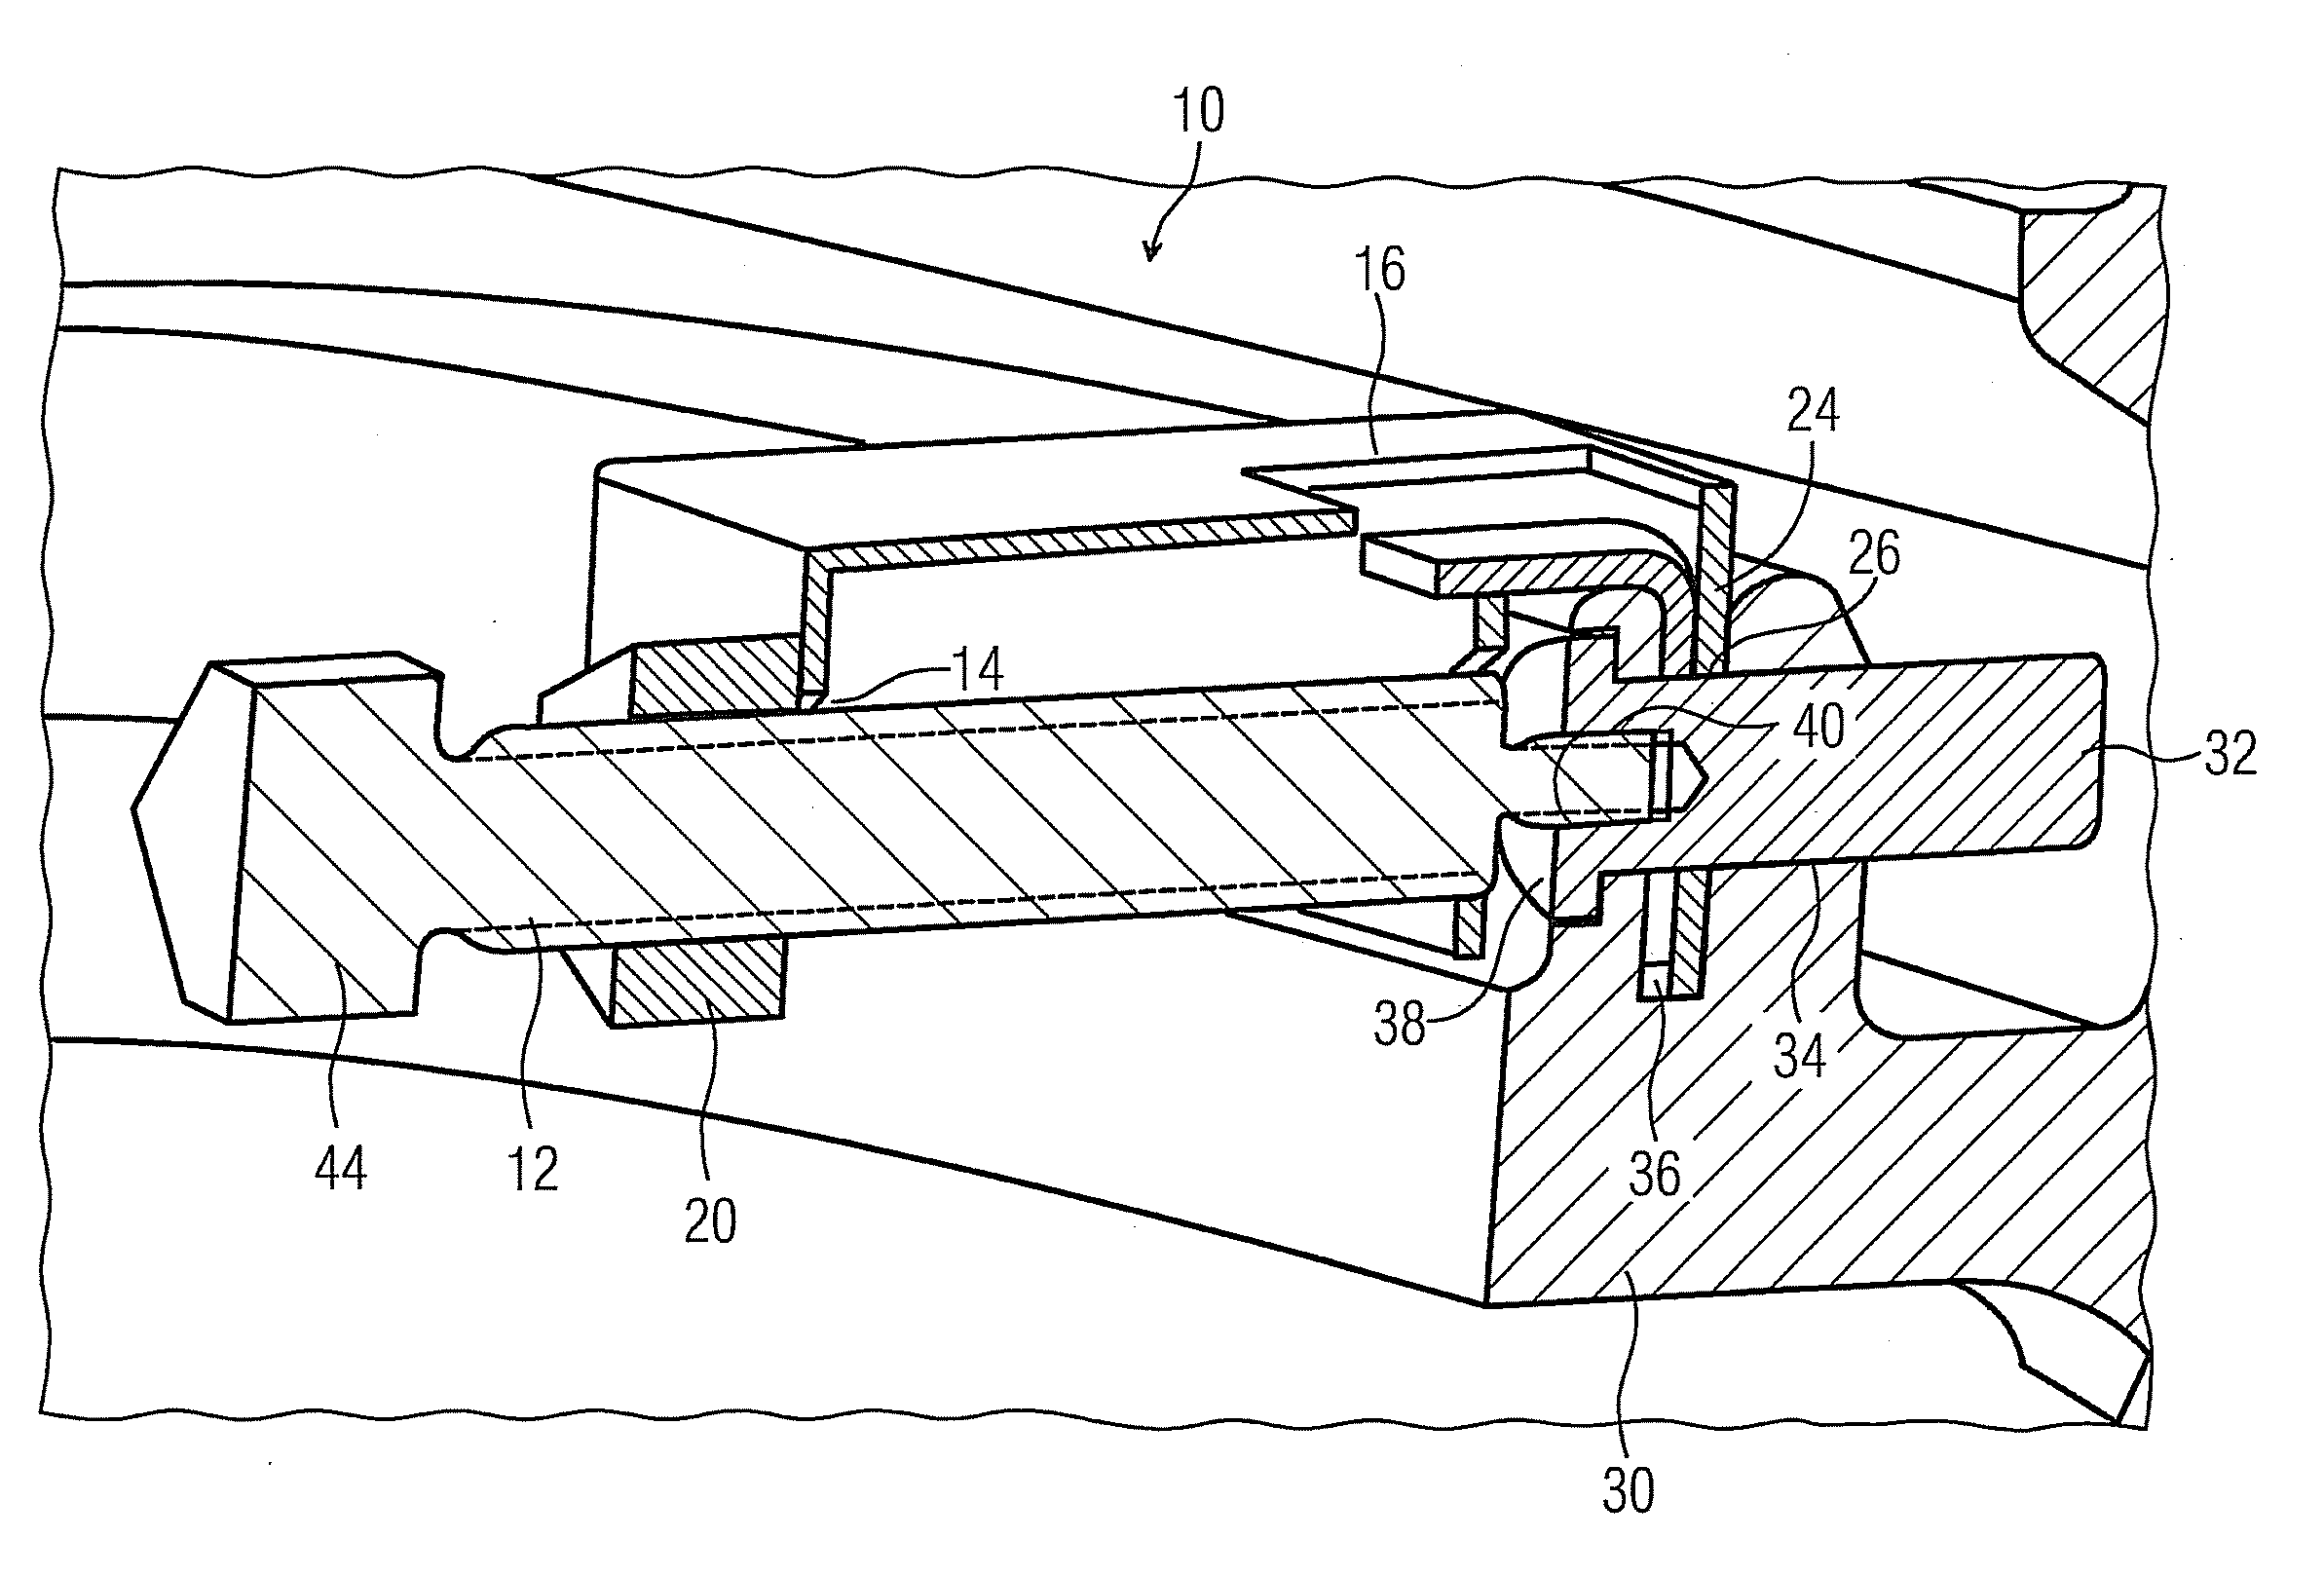 Multi-part pin remover for removing a pin or stud from a hole of a component